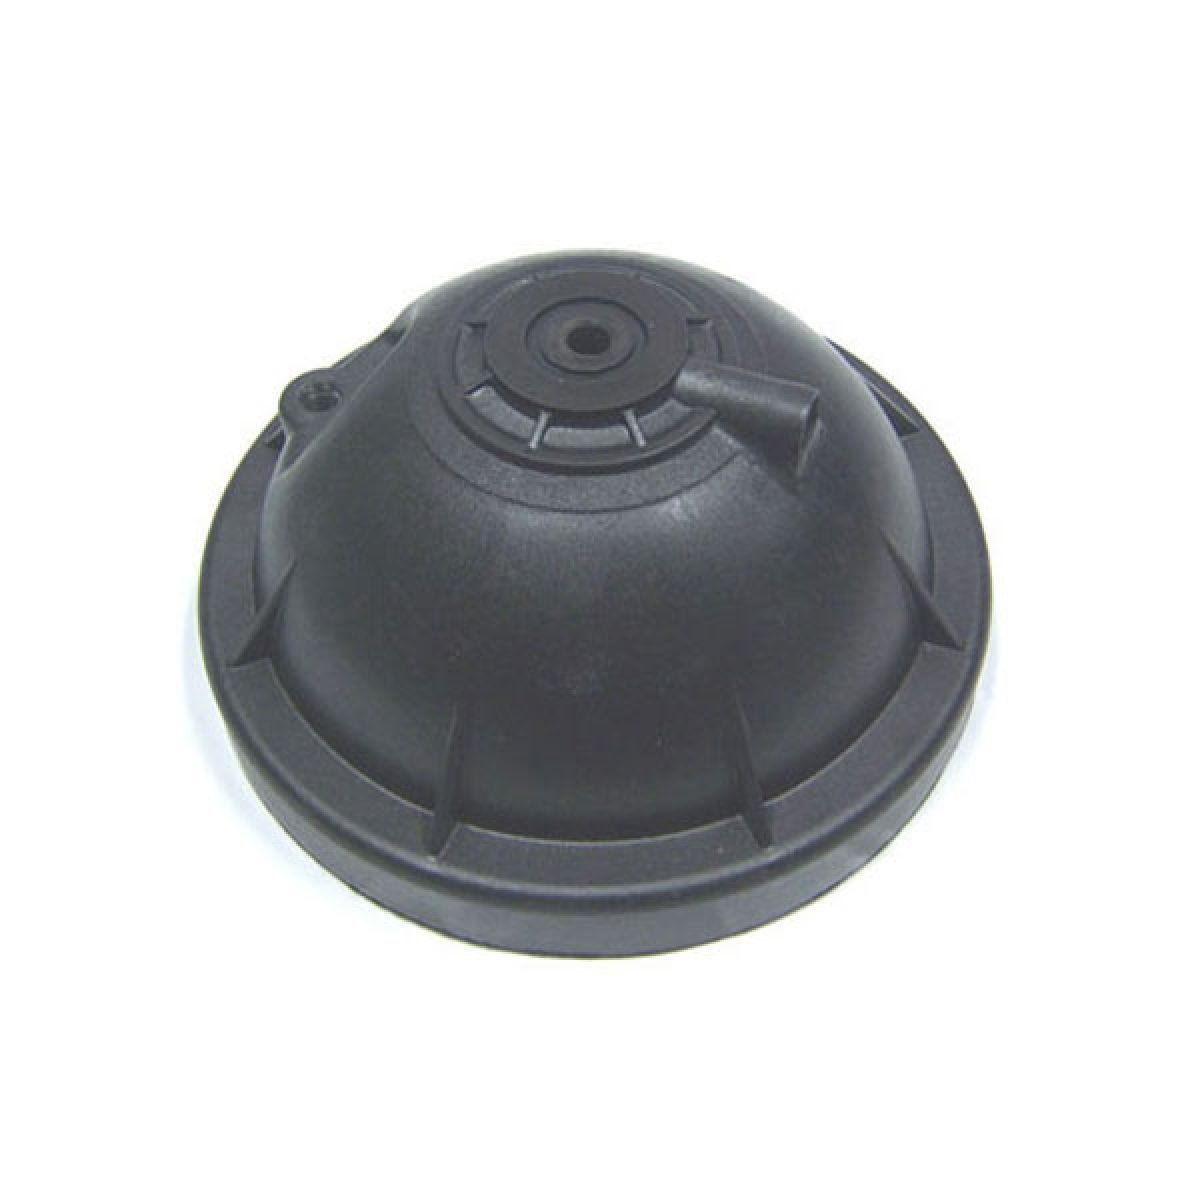 Hayward CX250C Filter Head Dome with Air Relief Valve Replacement Star-Clear Cartridge Filter